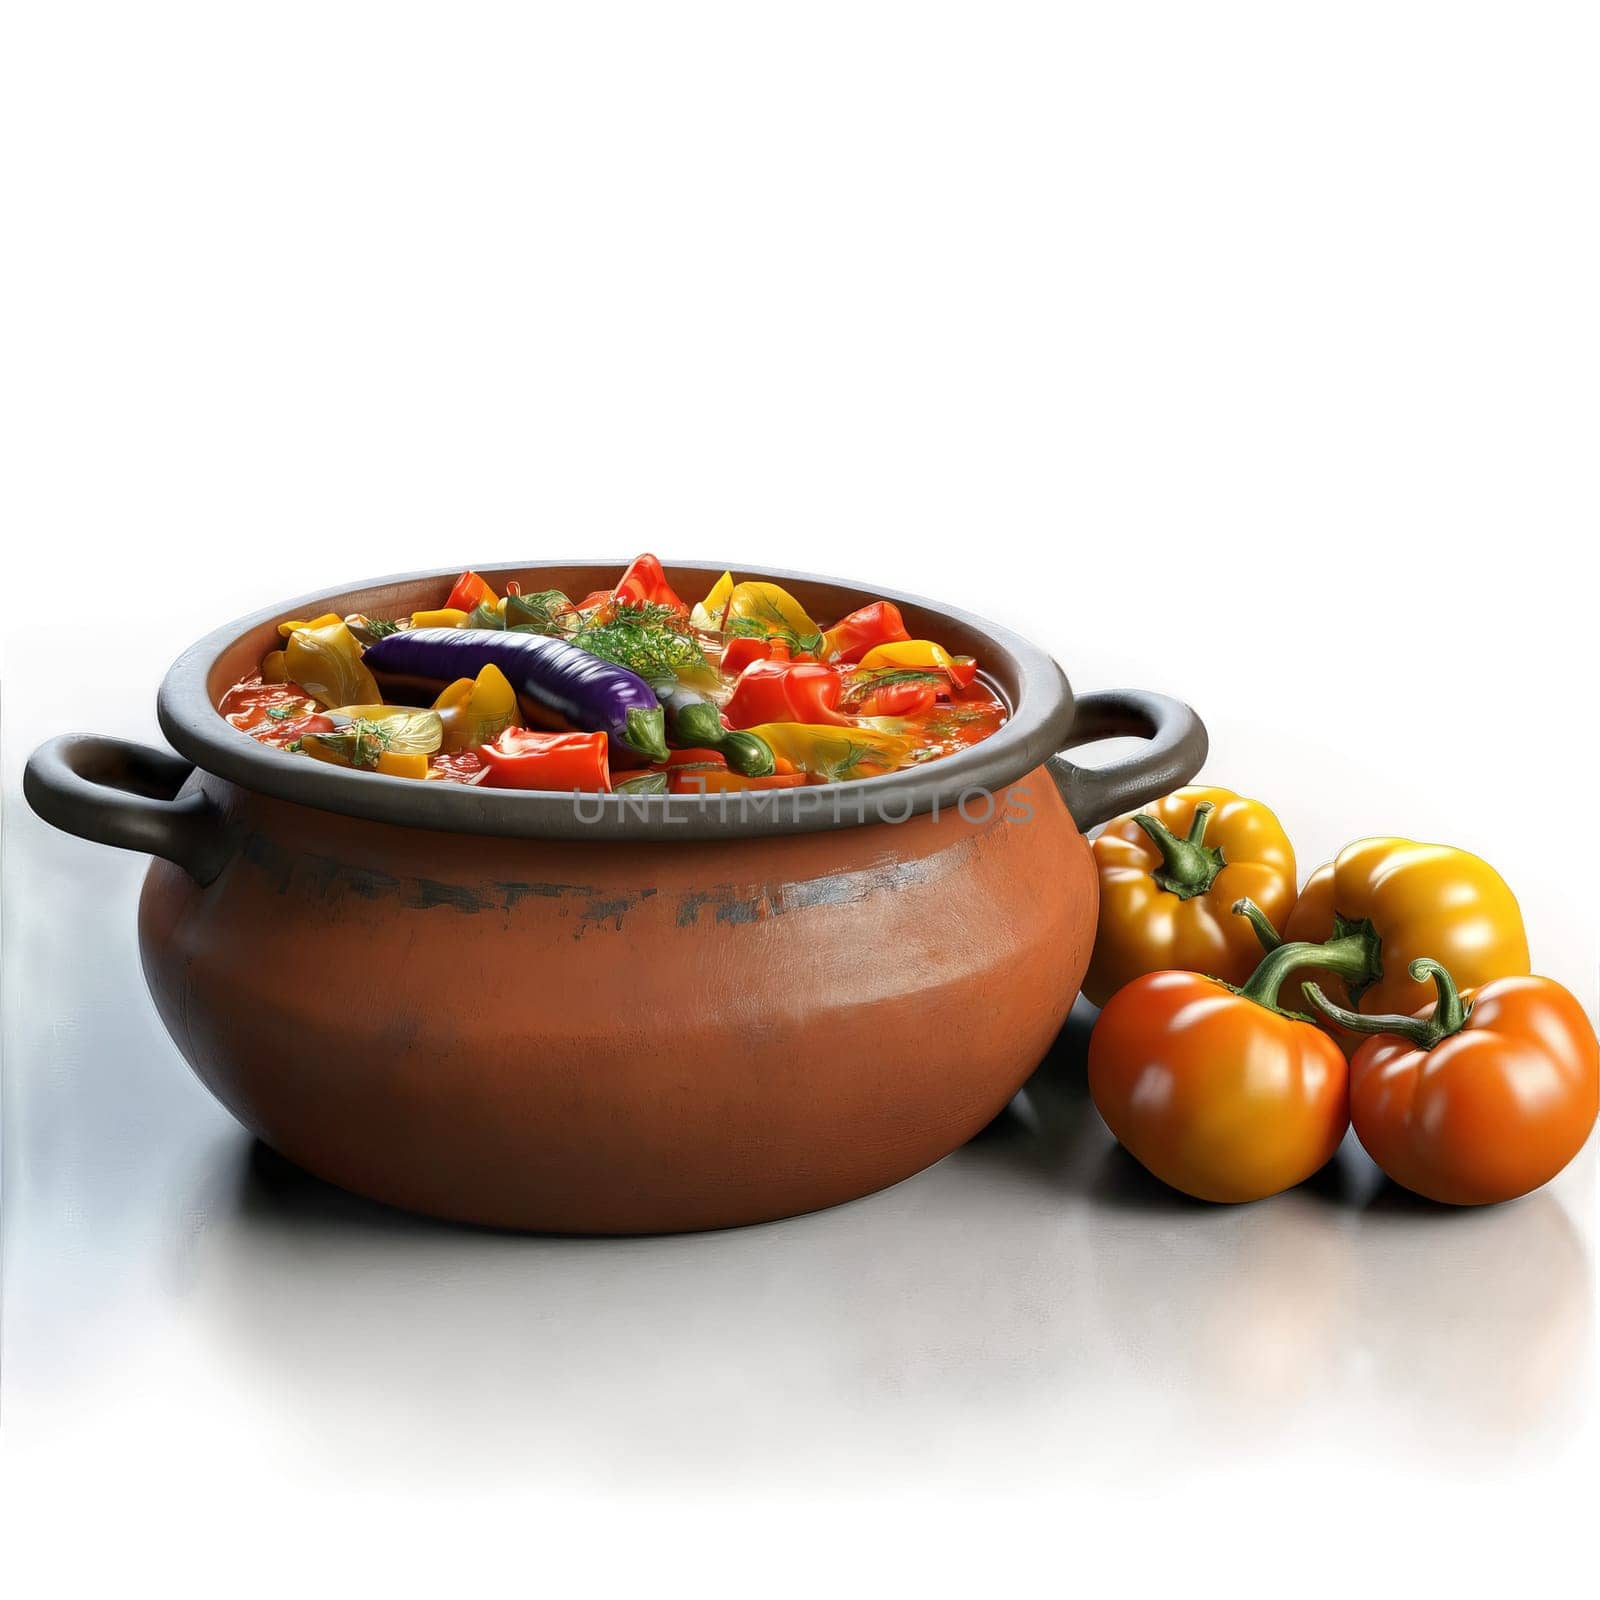 Georgian ajapsandali eggplant stew tomatoes bell peppers onions herbs served in a clay pot Culinary. close-up food, isolated on transparent background